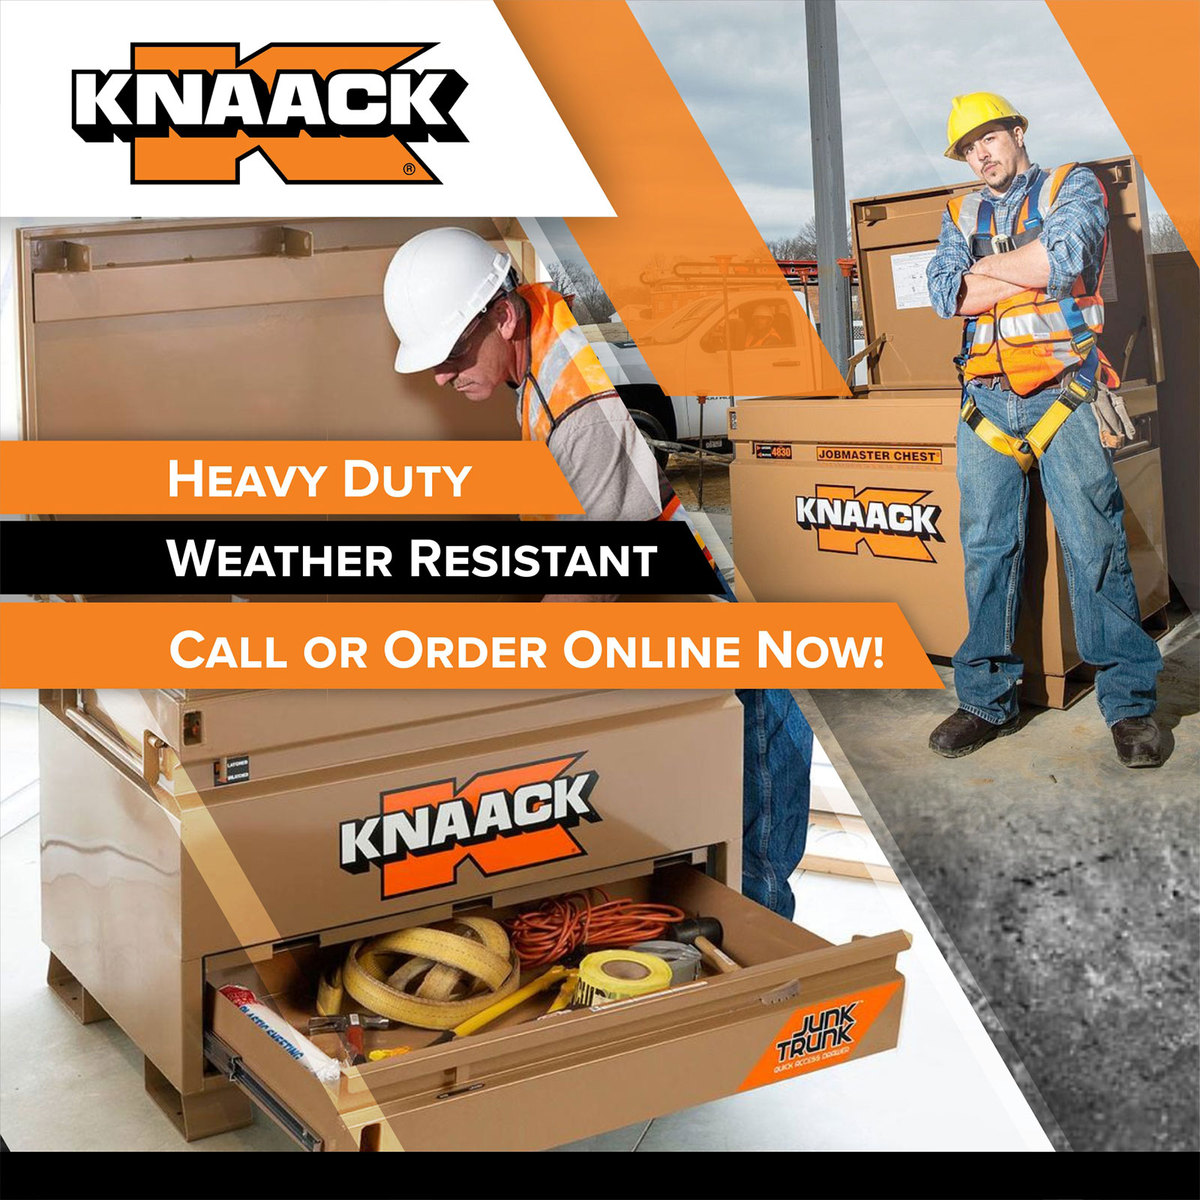 Knaack heavy duty, weather resistant full products